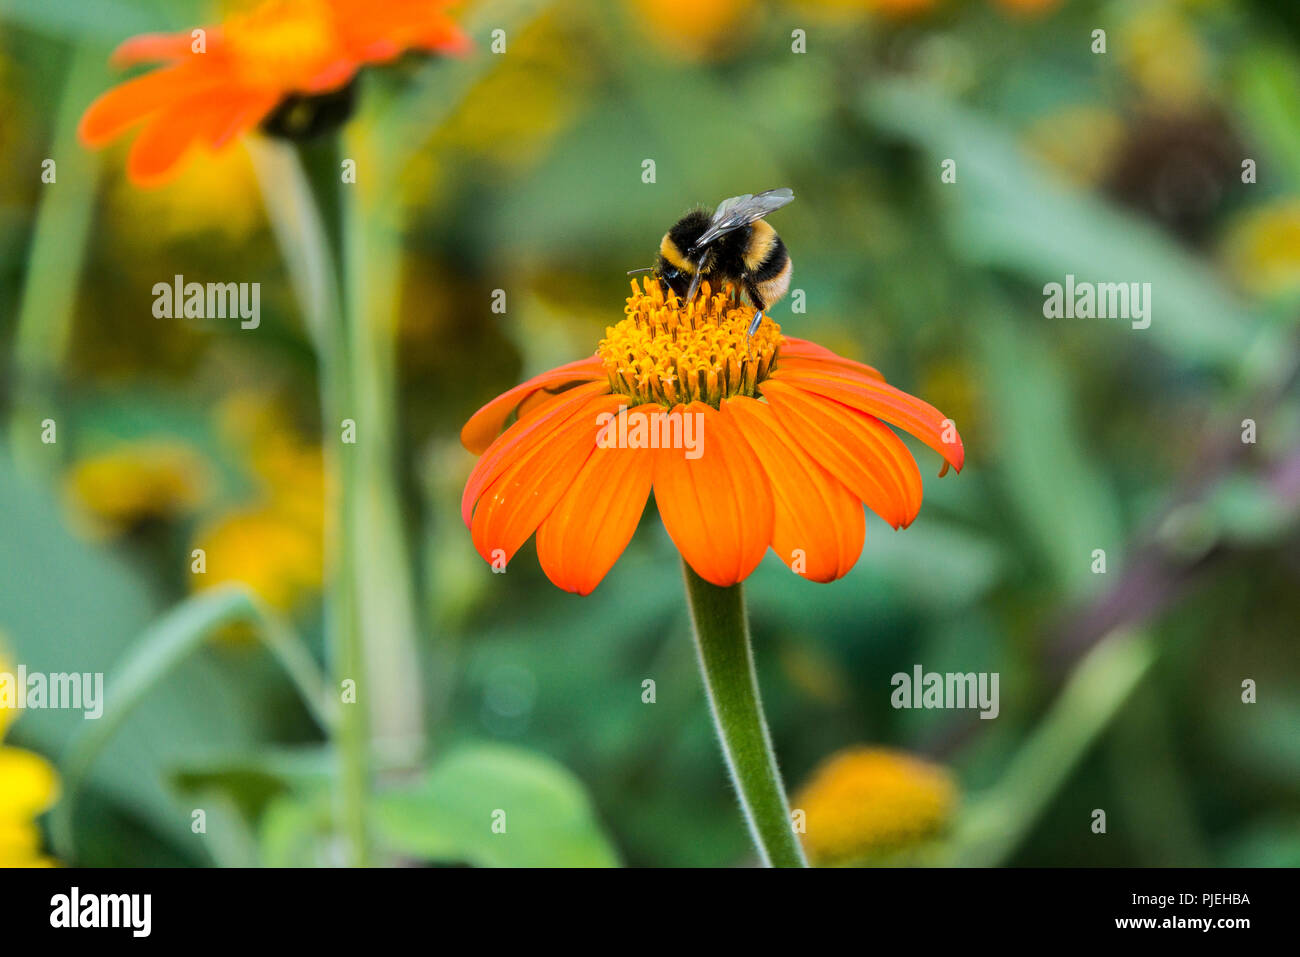 A bumble bee on a Mexican sunflower 'Torch' (Tithonia rotundifolia 'Torch') Stock Photo